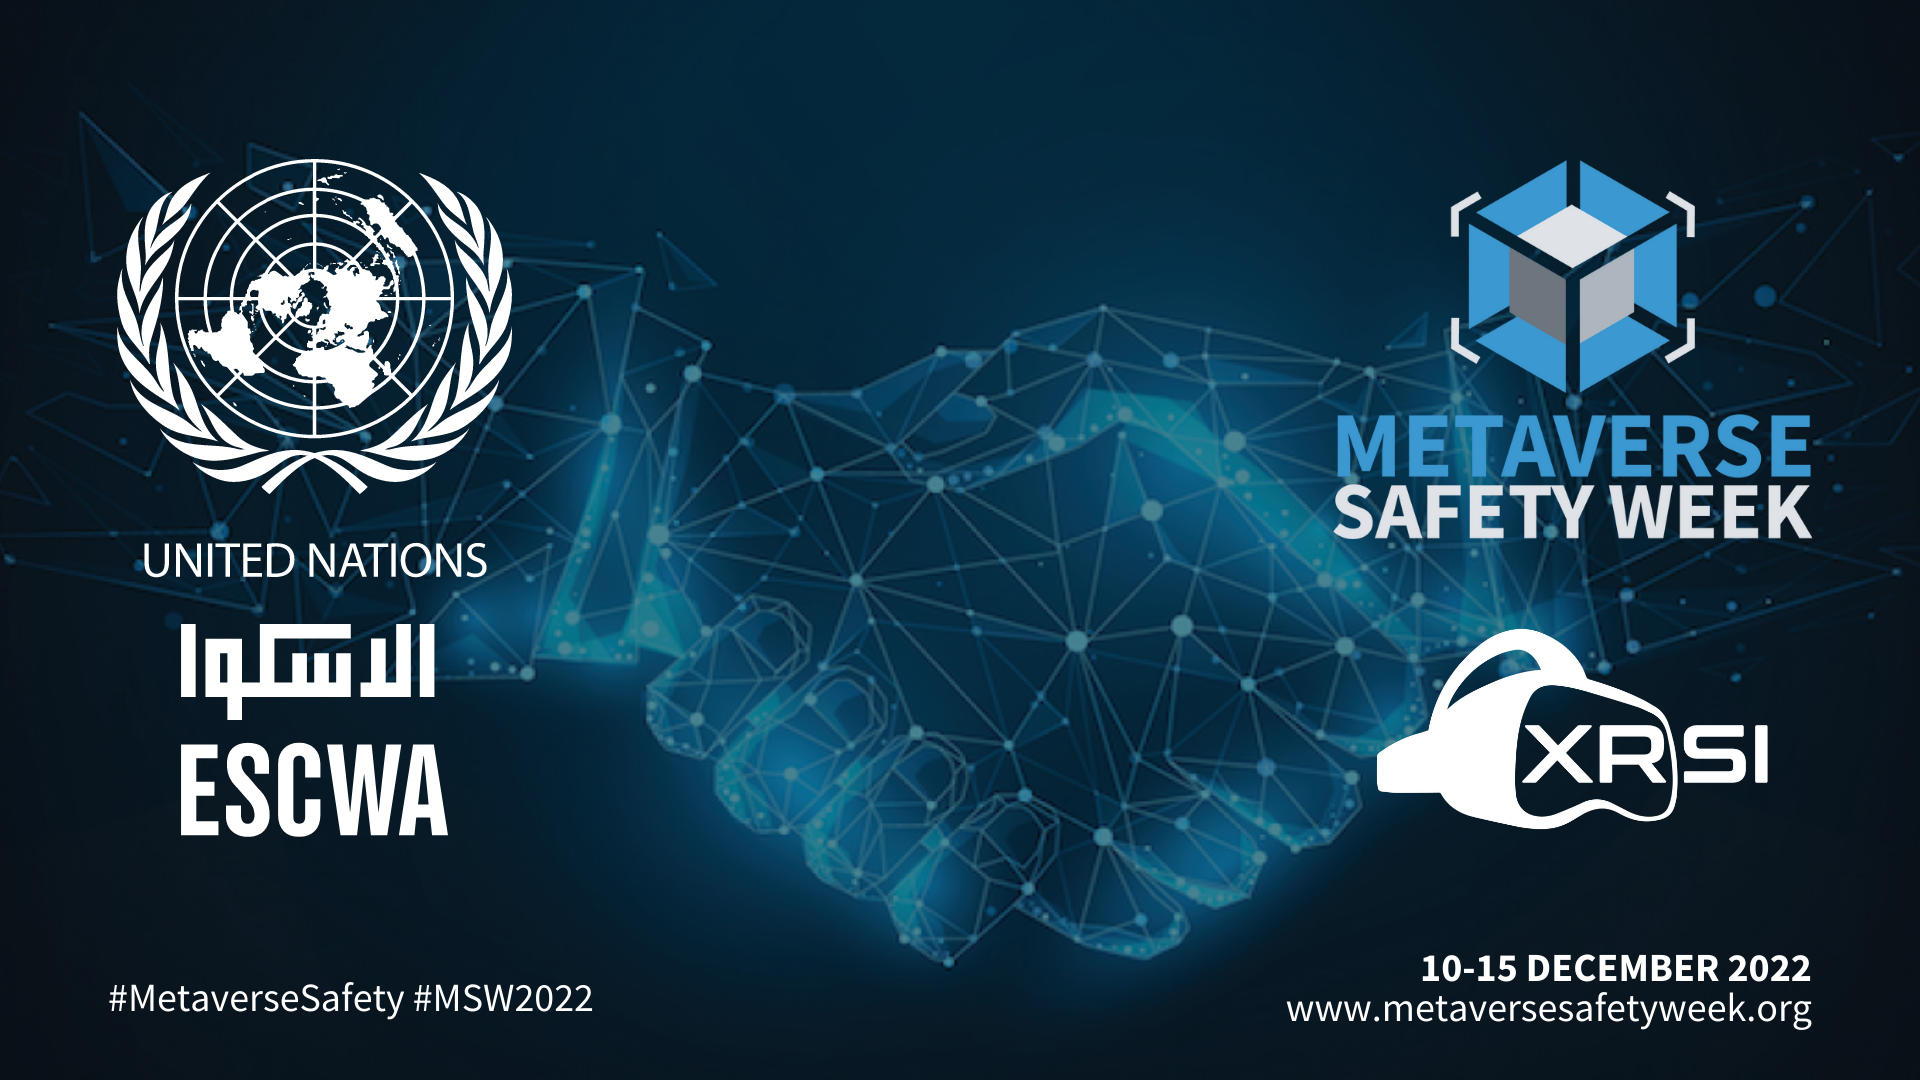 UN-ESCWA becomes the first UN agency to adopt Metaverse Safety Week Global Awareness Campaign: Announced during Arab SME Summit in Amman, Jordan